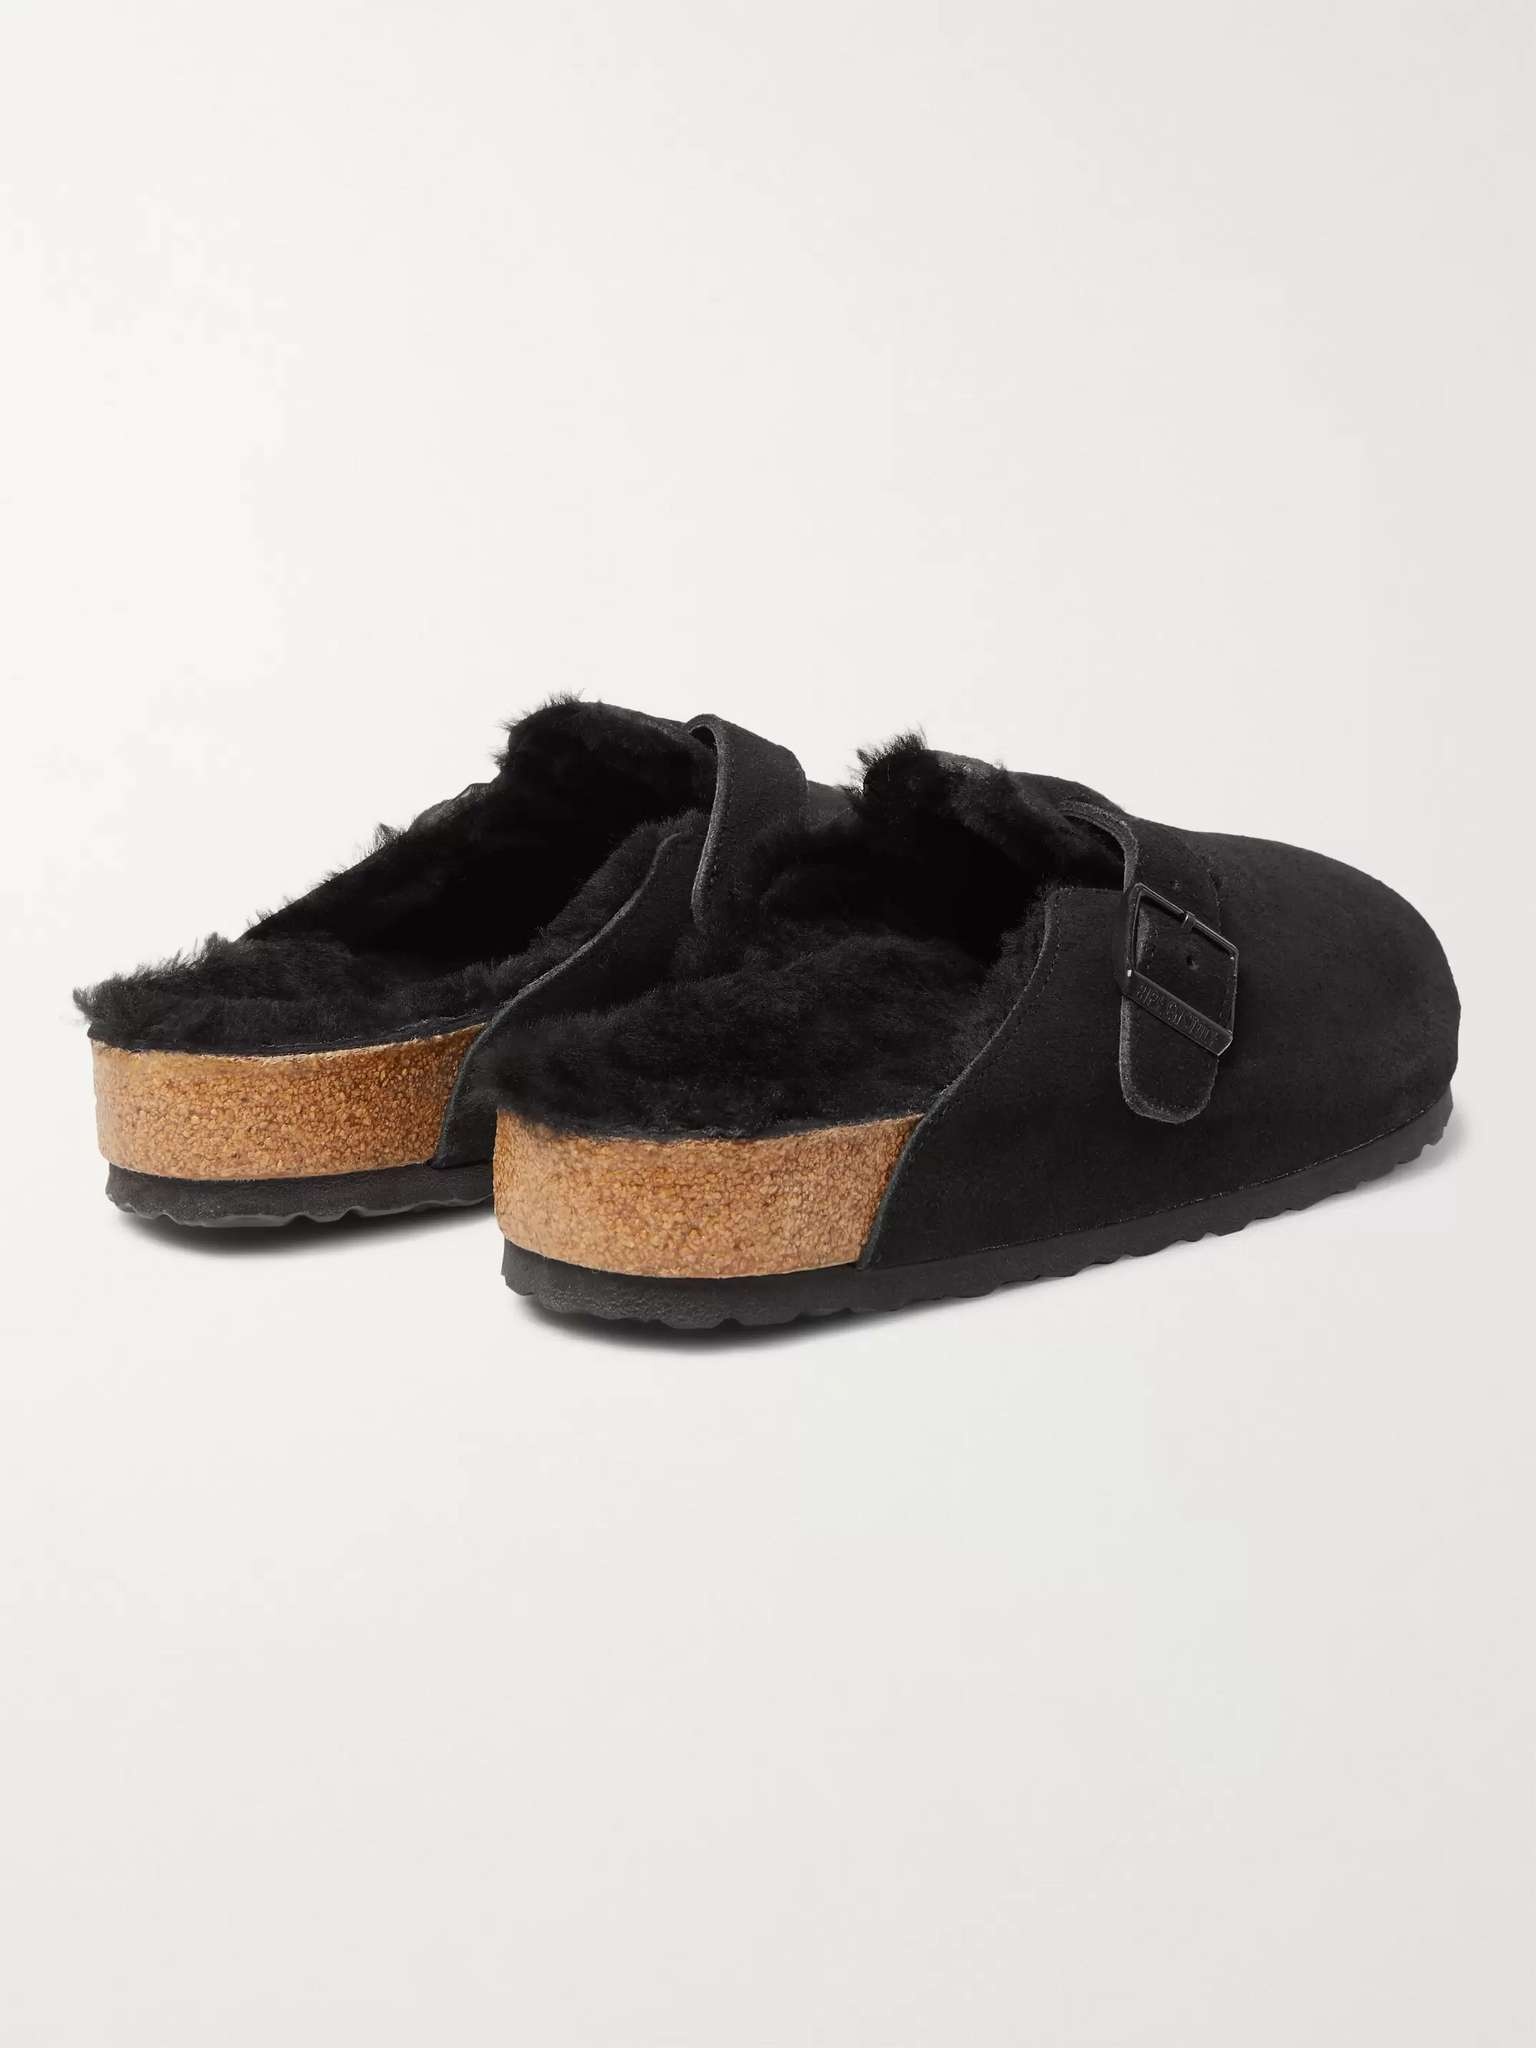 Boston Shearling-Lined Suede Clogs - 5